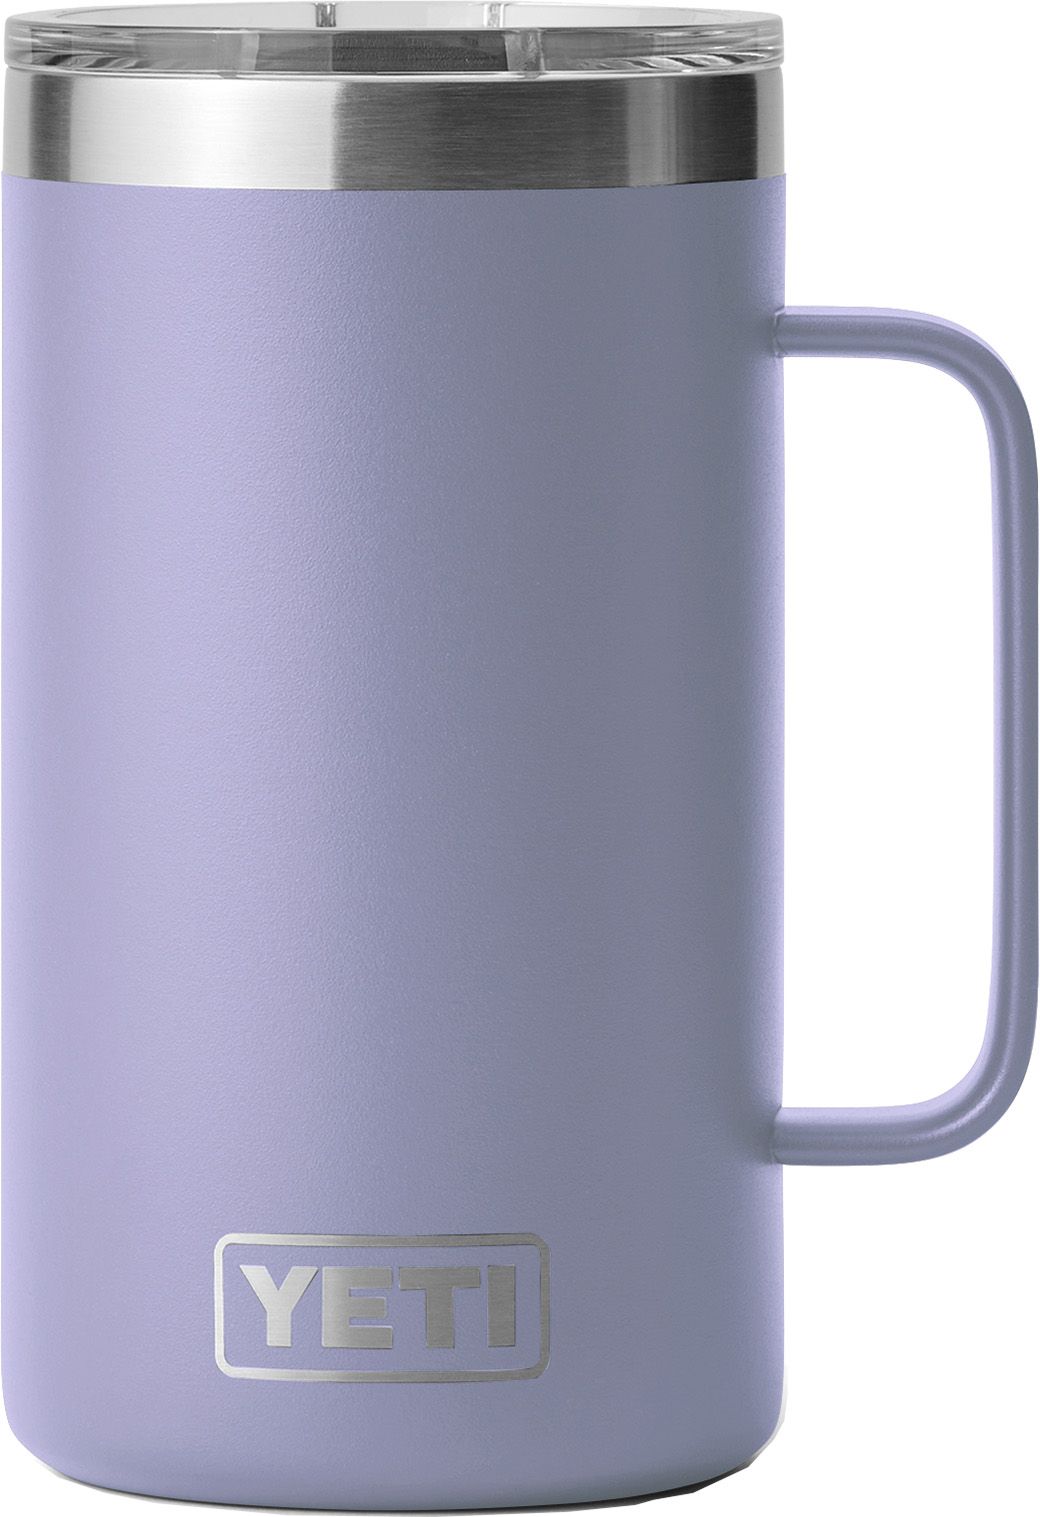 The Wickertree - We're introducing our newest arrival – the Yeti stackable  cups and mugs! Made specially for those divine espresso moments, these small  but mighty beverage holders are all the rave.